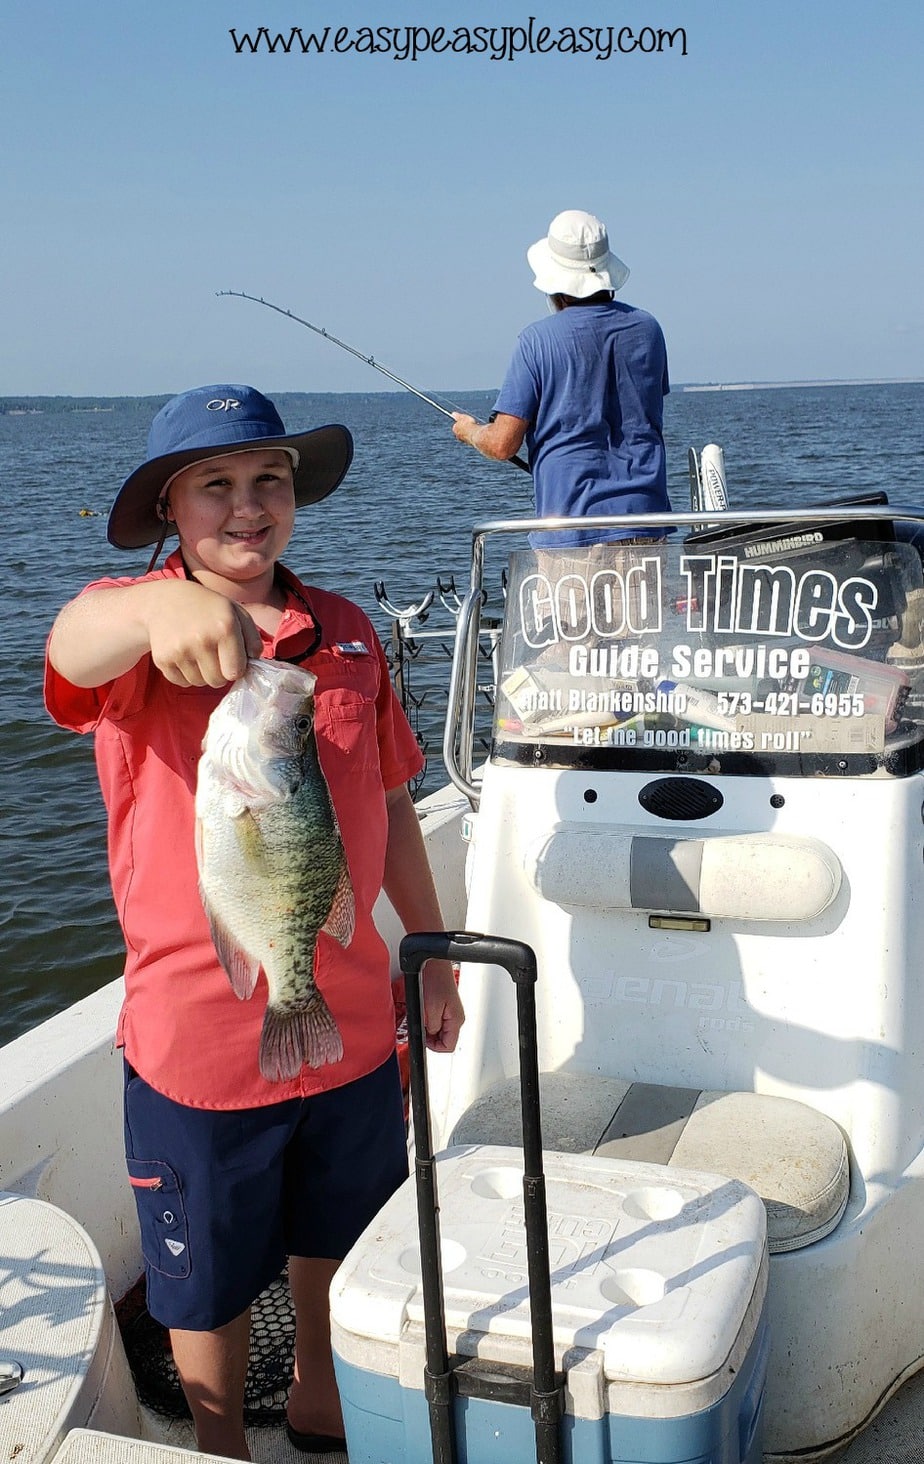 Gift for dad that will last a lifetime! Father and son fishing trip with Good Times Guide Service brings home the crappie.